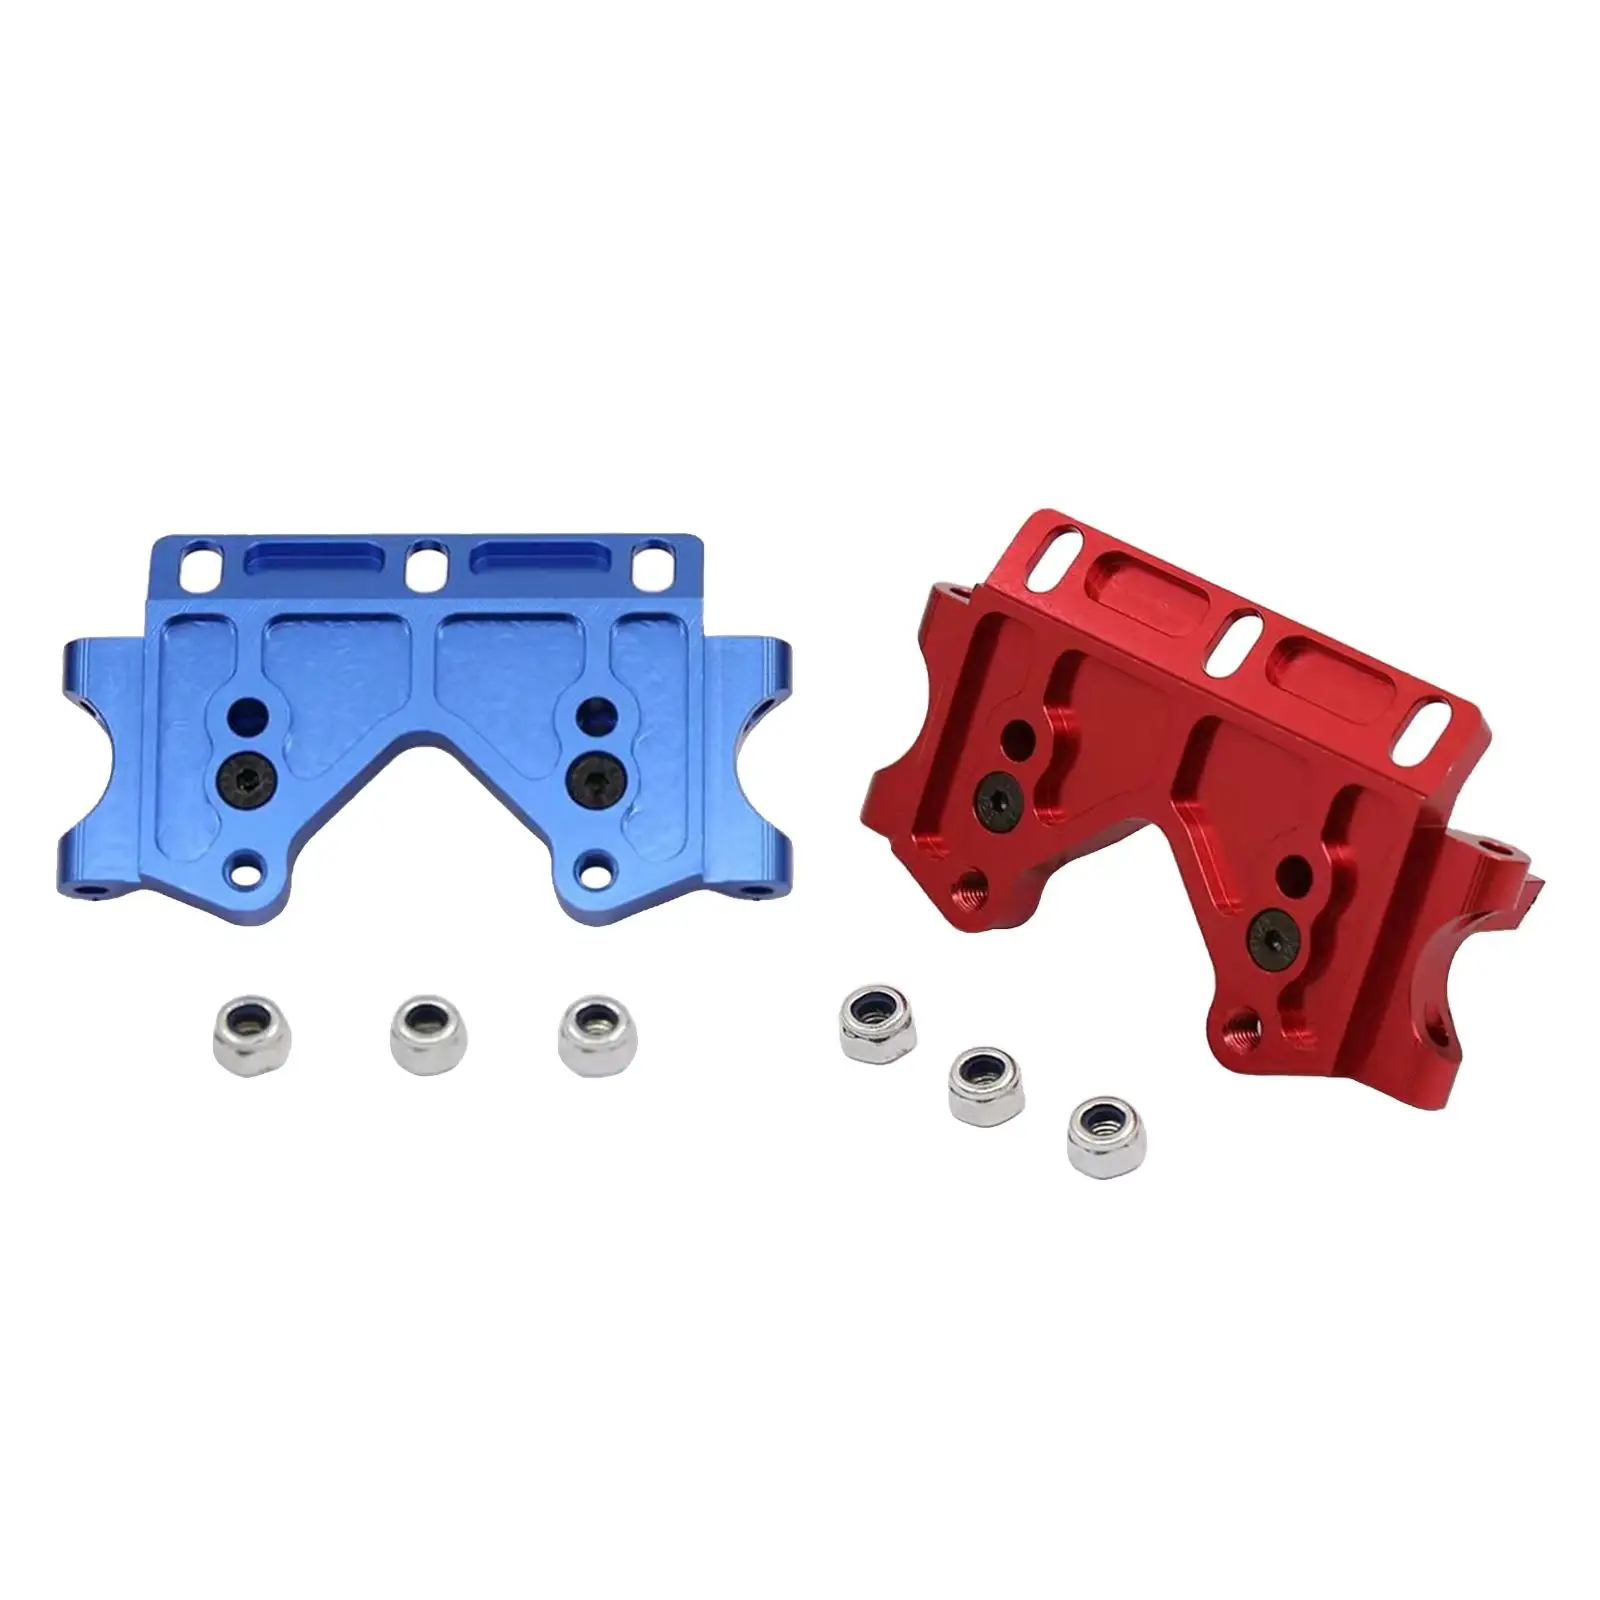 1/10Front Lower Bulkhead Replaces Parts for Slash 2WD RC Car Upgrade Parts